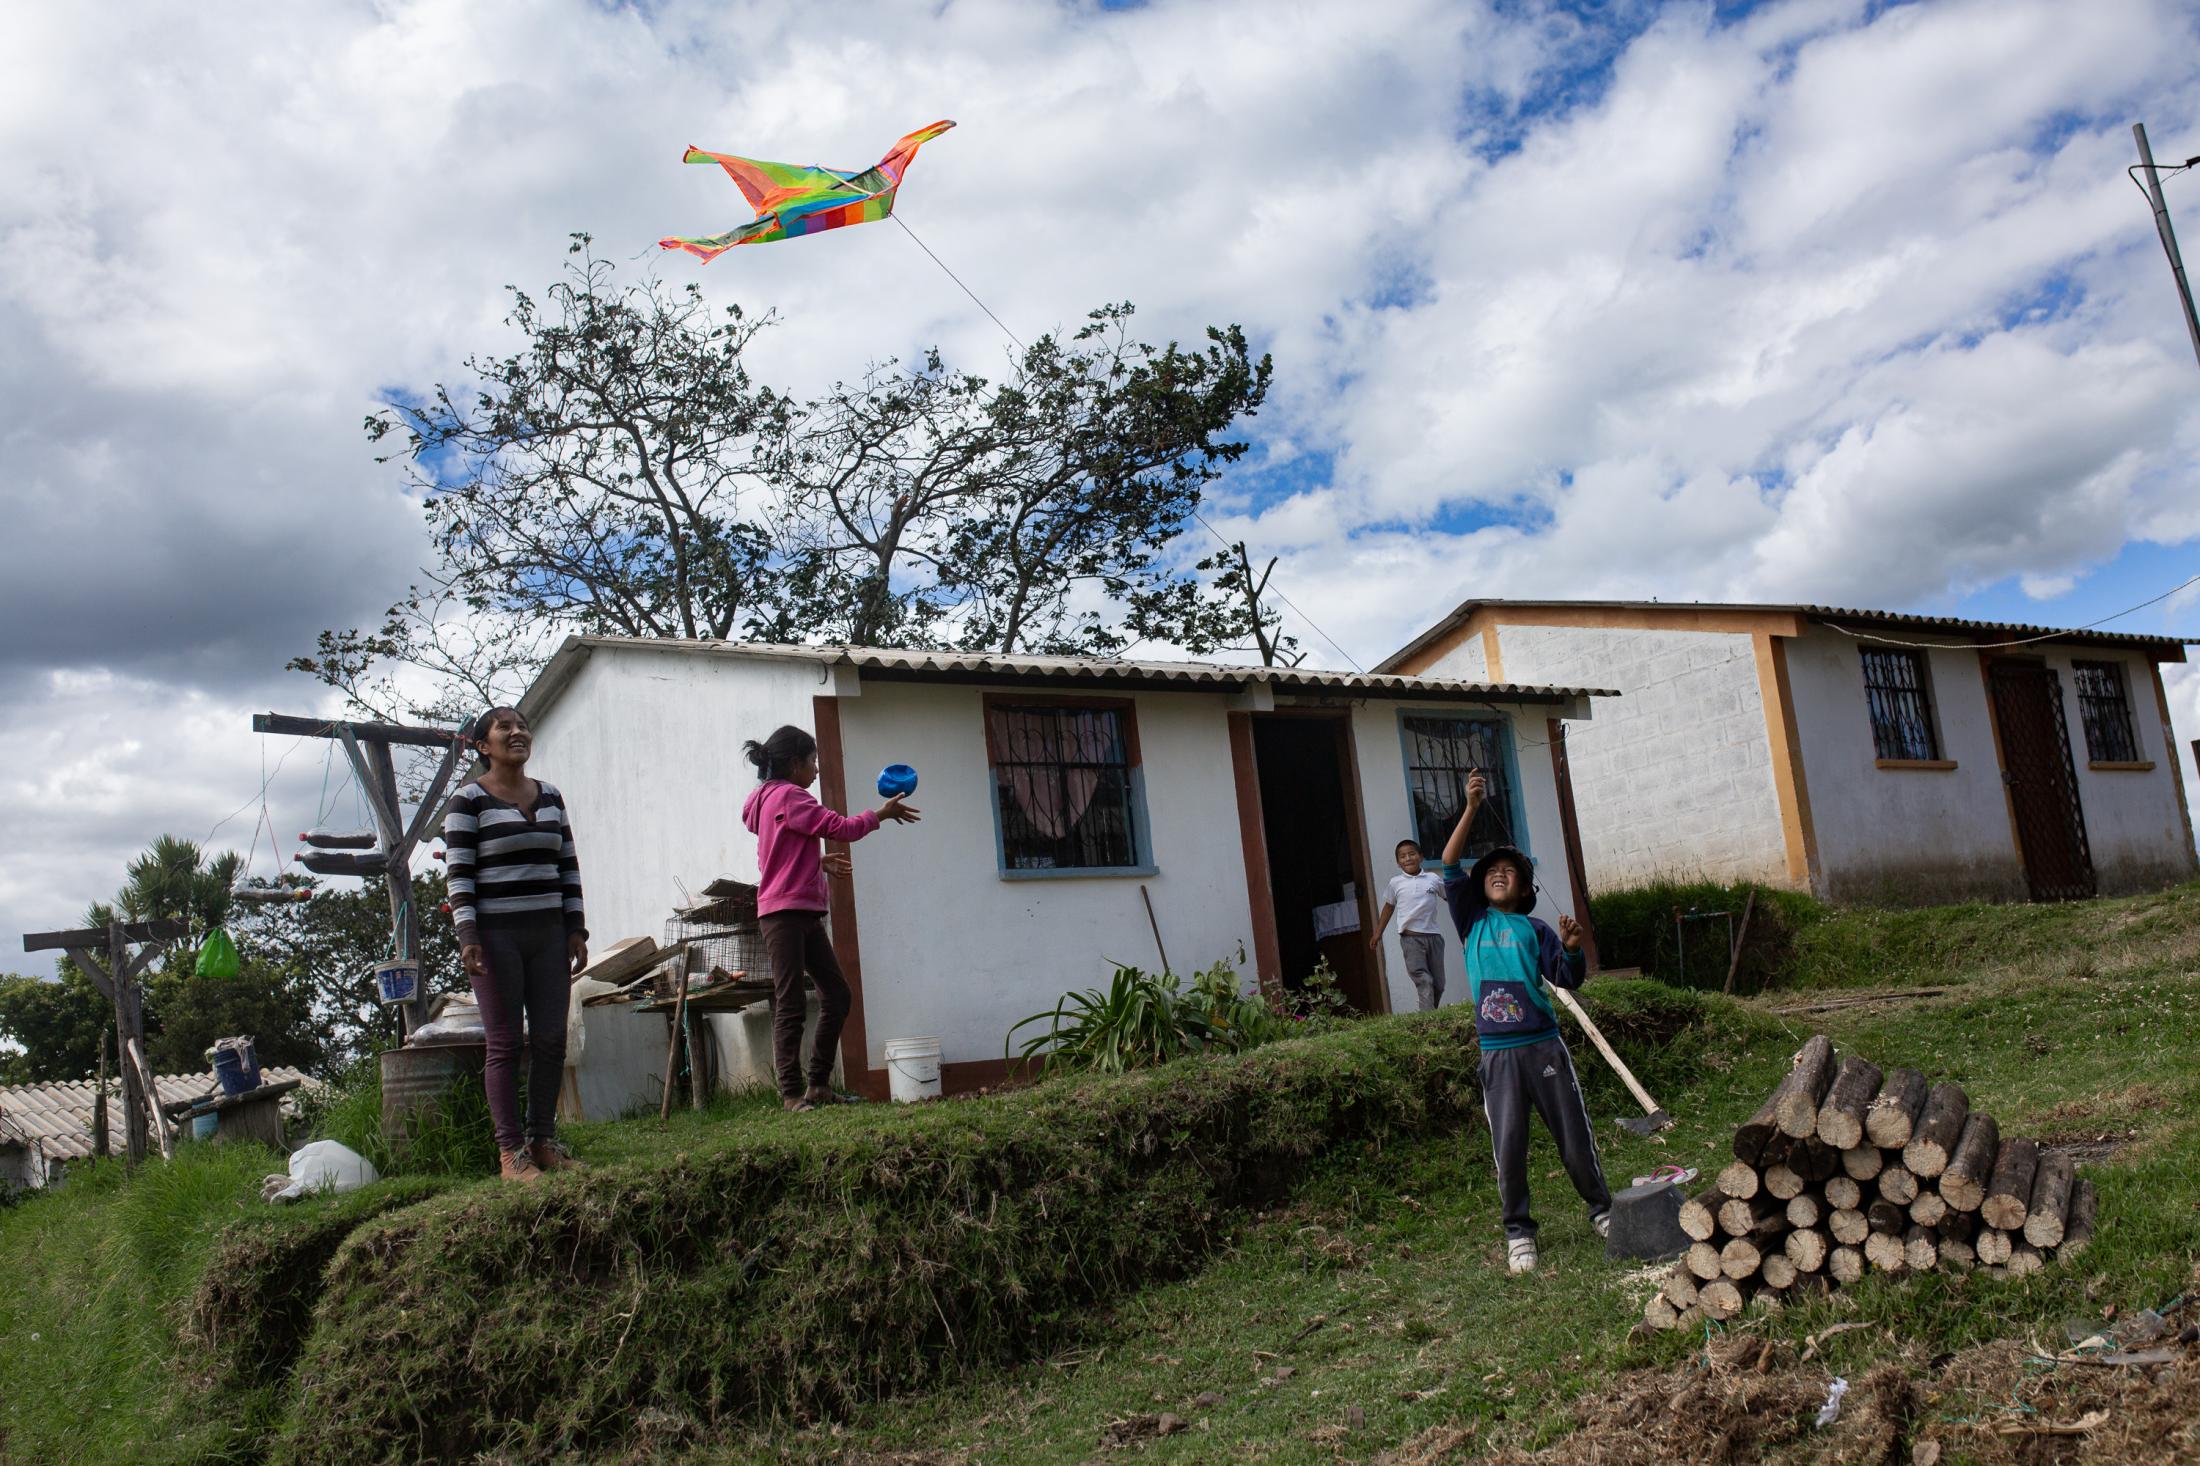 Sandra Guallichico (32) along with her children Celina (12), C&eacute;sar (8) and Francisco (11) spend part of their day outside the house, playing, taking care of their plants. When the weather permits, they like to go out and fly kites. May 26th, 2020. Cotogchoa-Ecuador. Andr&eacute;s Y&eacute;pez. Everyday life in rural areas has been affected differently than in urban areas. Their confinement is not limited to being inside the house. The countryside is part of their home.